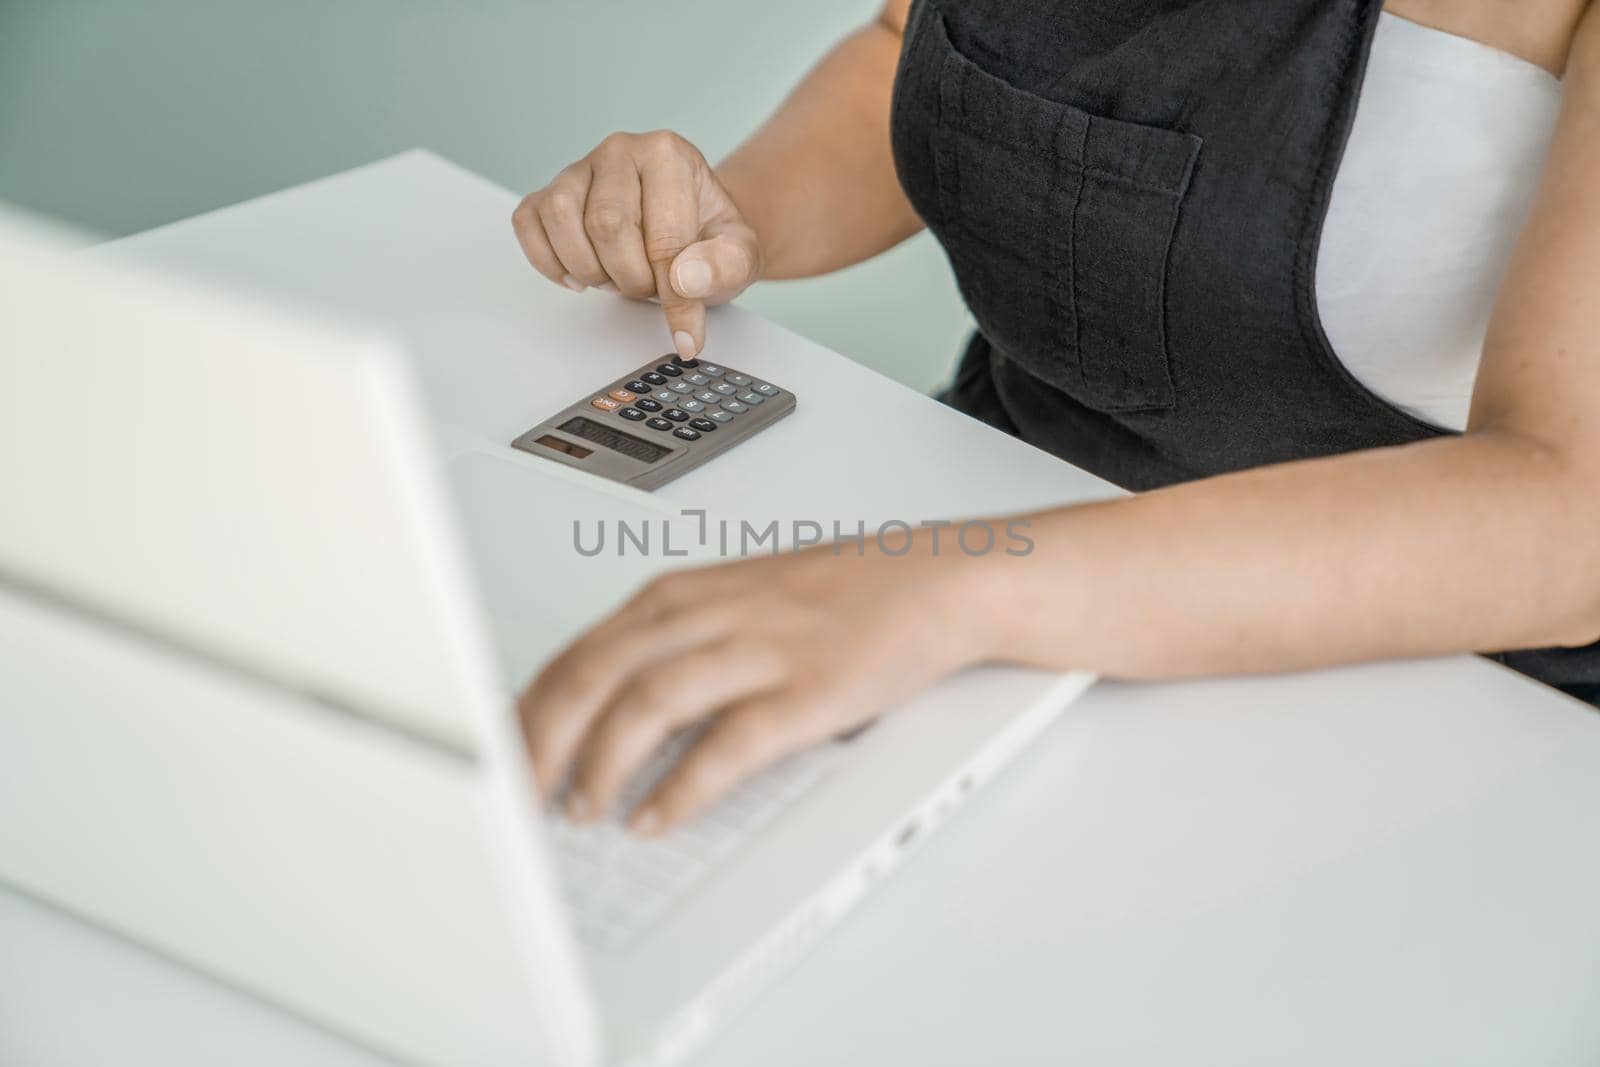 Young woman is sitting at her laptop and doing calculations on calculator. Hands, calculator, and laptop close-up. Concept of financial and project calculations and accounting.